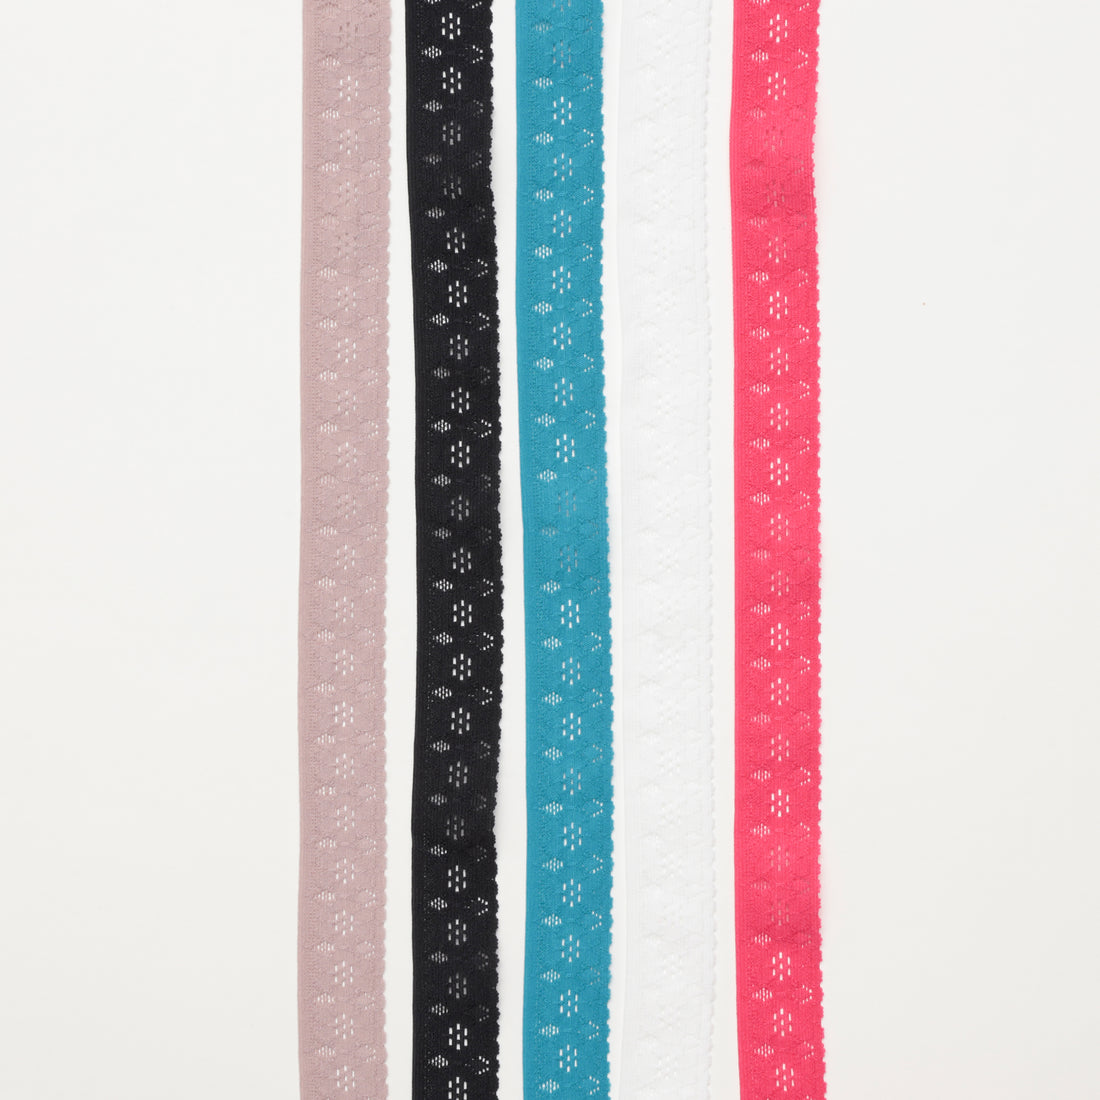 Stretch Lace Elastic - 24mm - Assorted